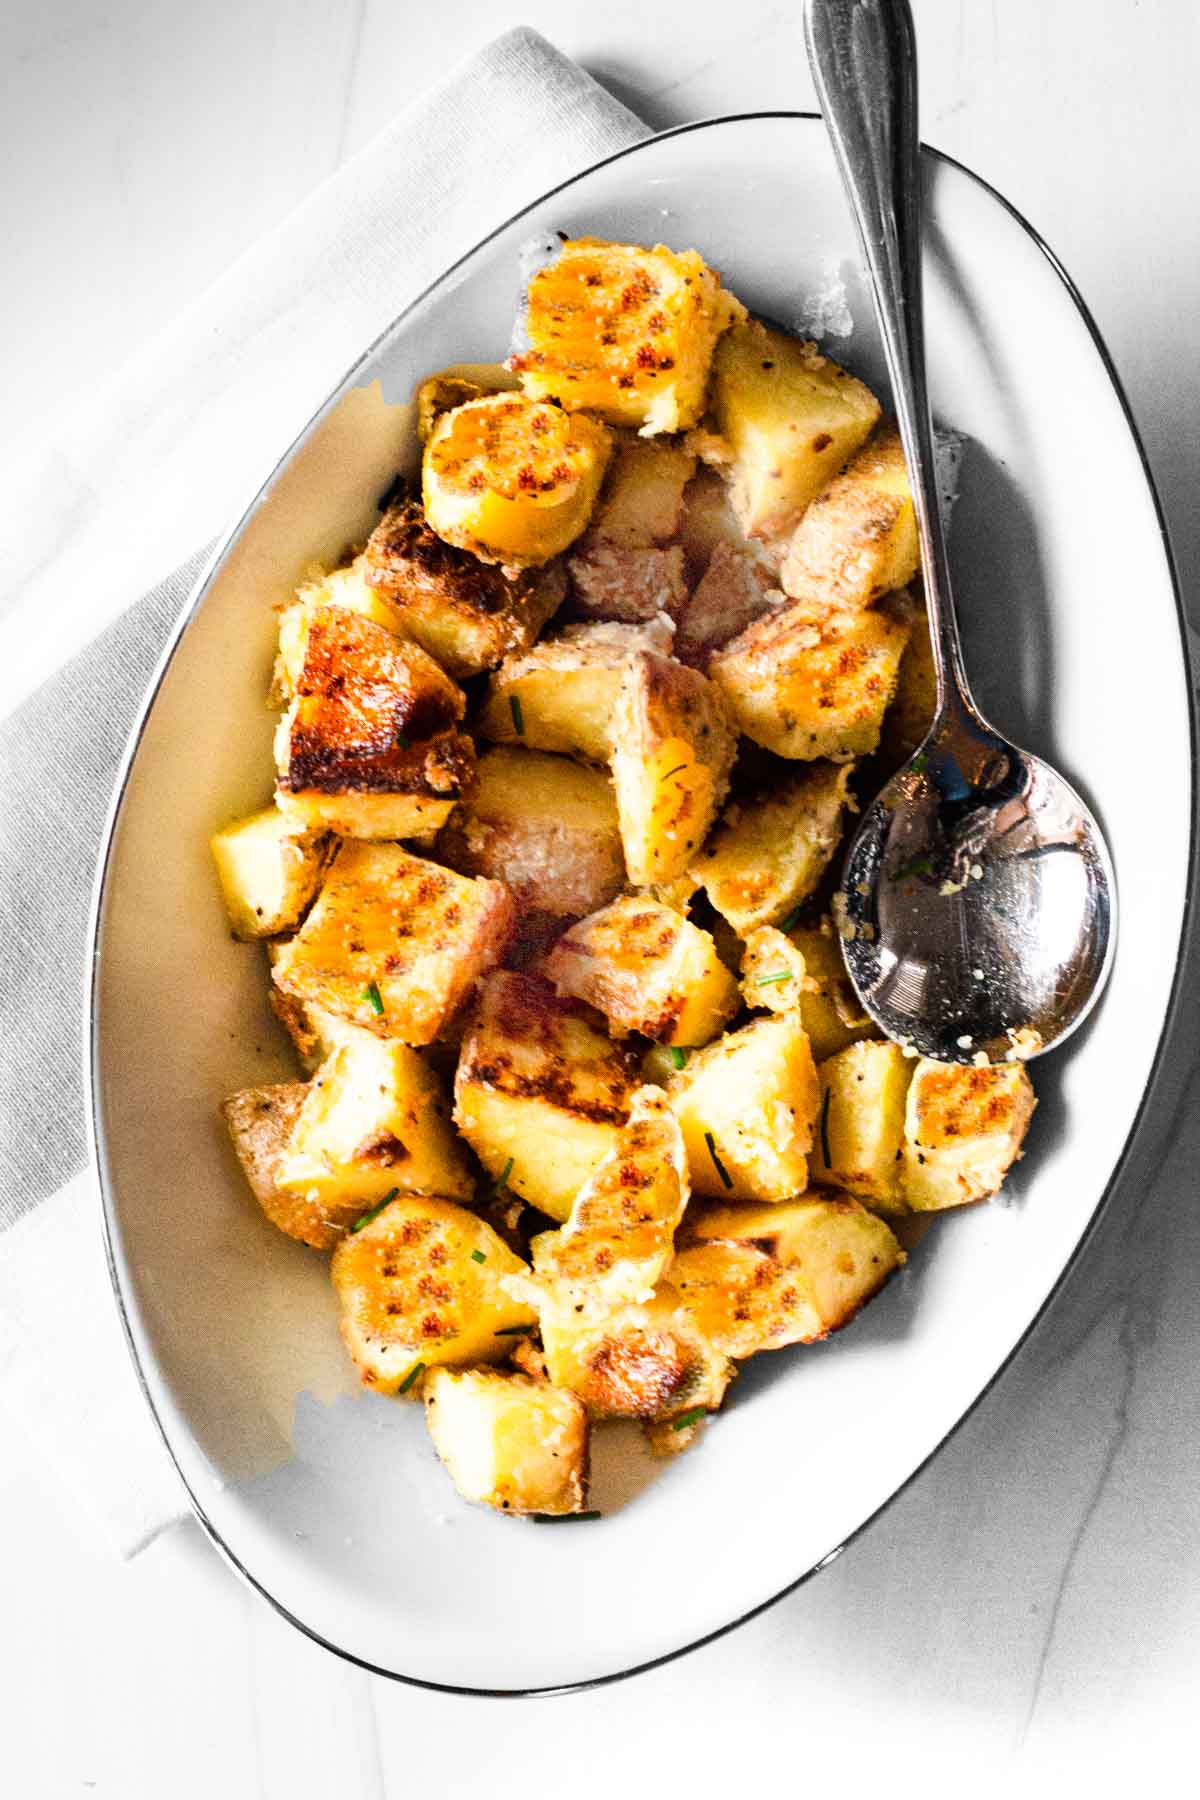 Parmesan crusted potatoes cubes in a white serving bowl.